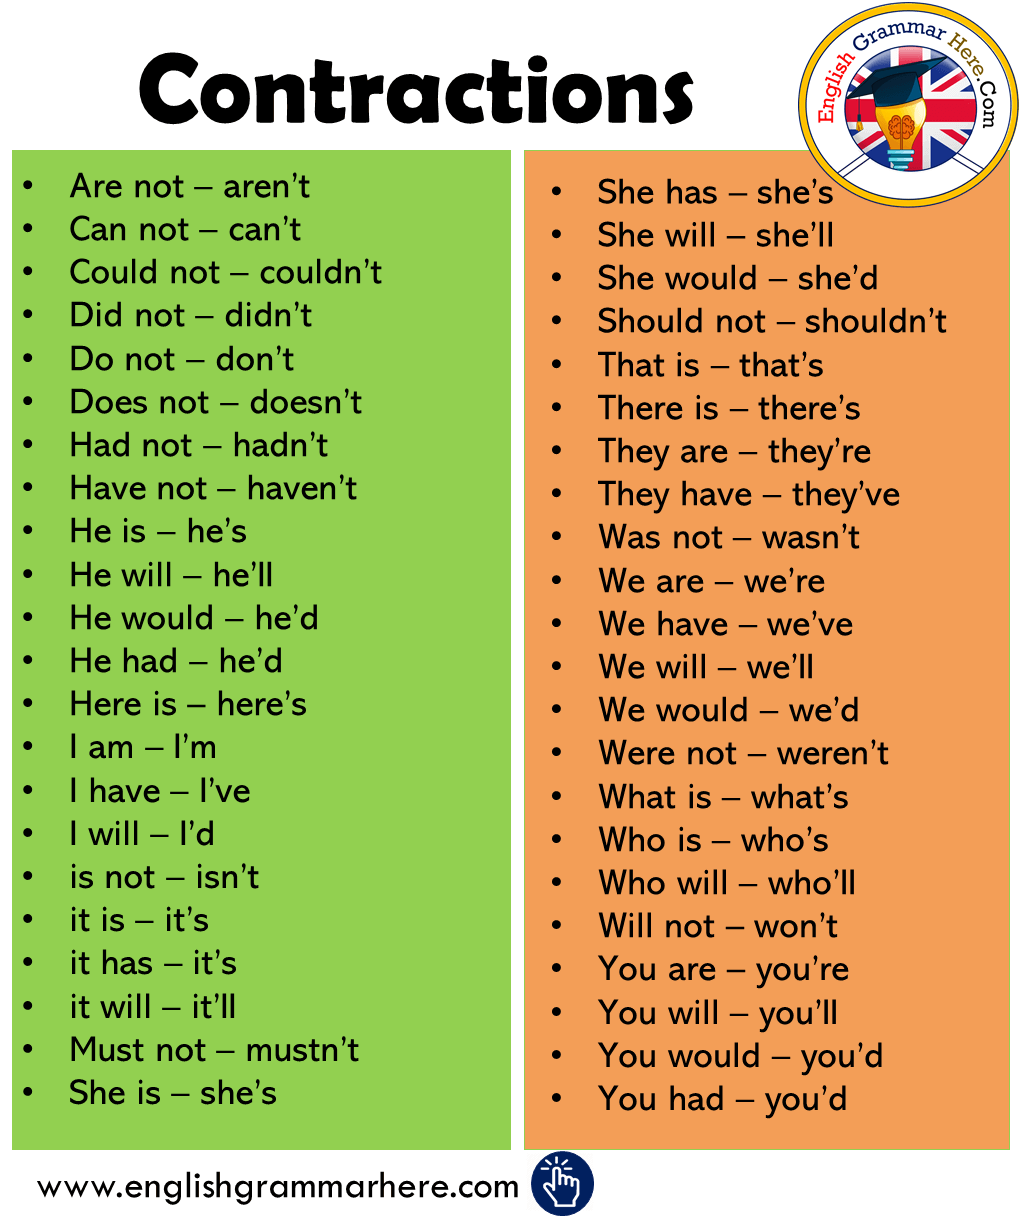 Contractions Examples in English